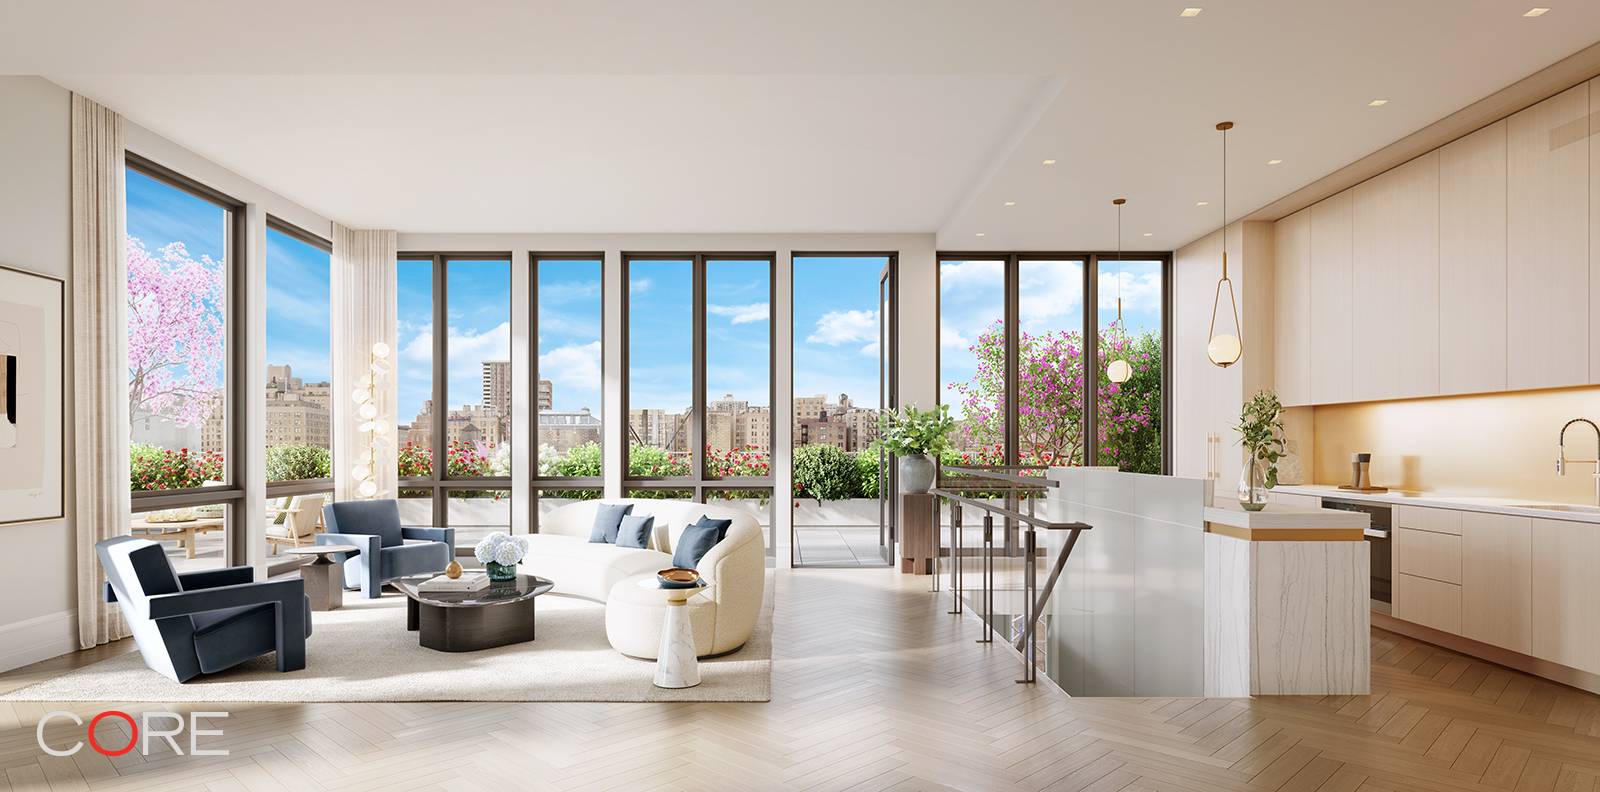 Building Occupancy early 2022 Introducing the Marlow a located in the heart of the Upper West Side, nestled among the neighborhood's signature brownstones, this 10 story, prewar building presents 27 ...